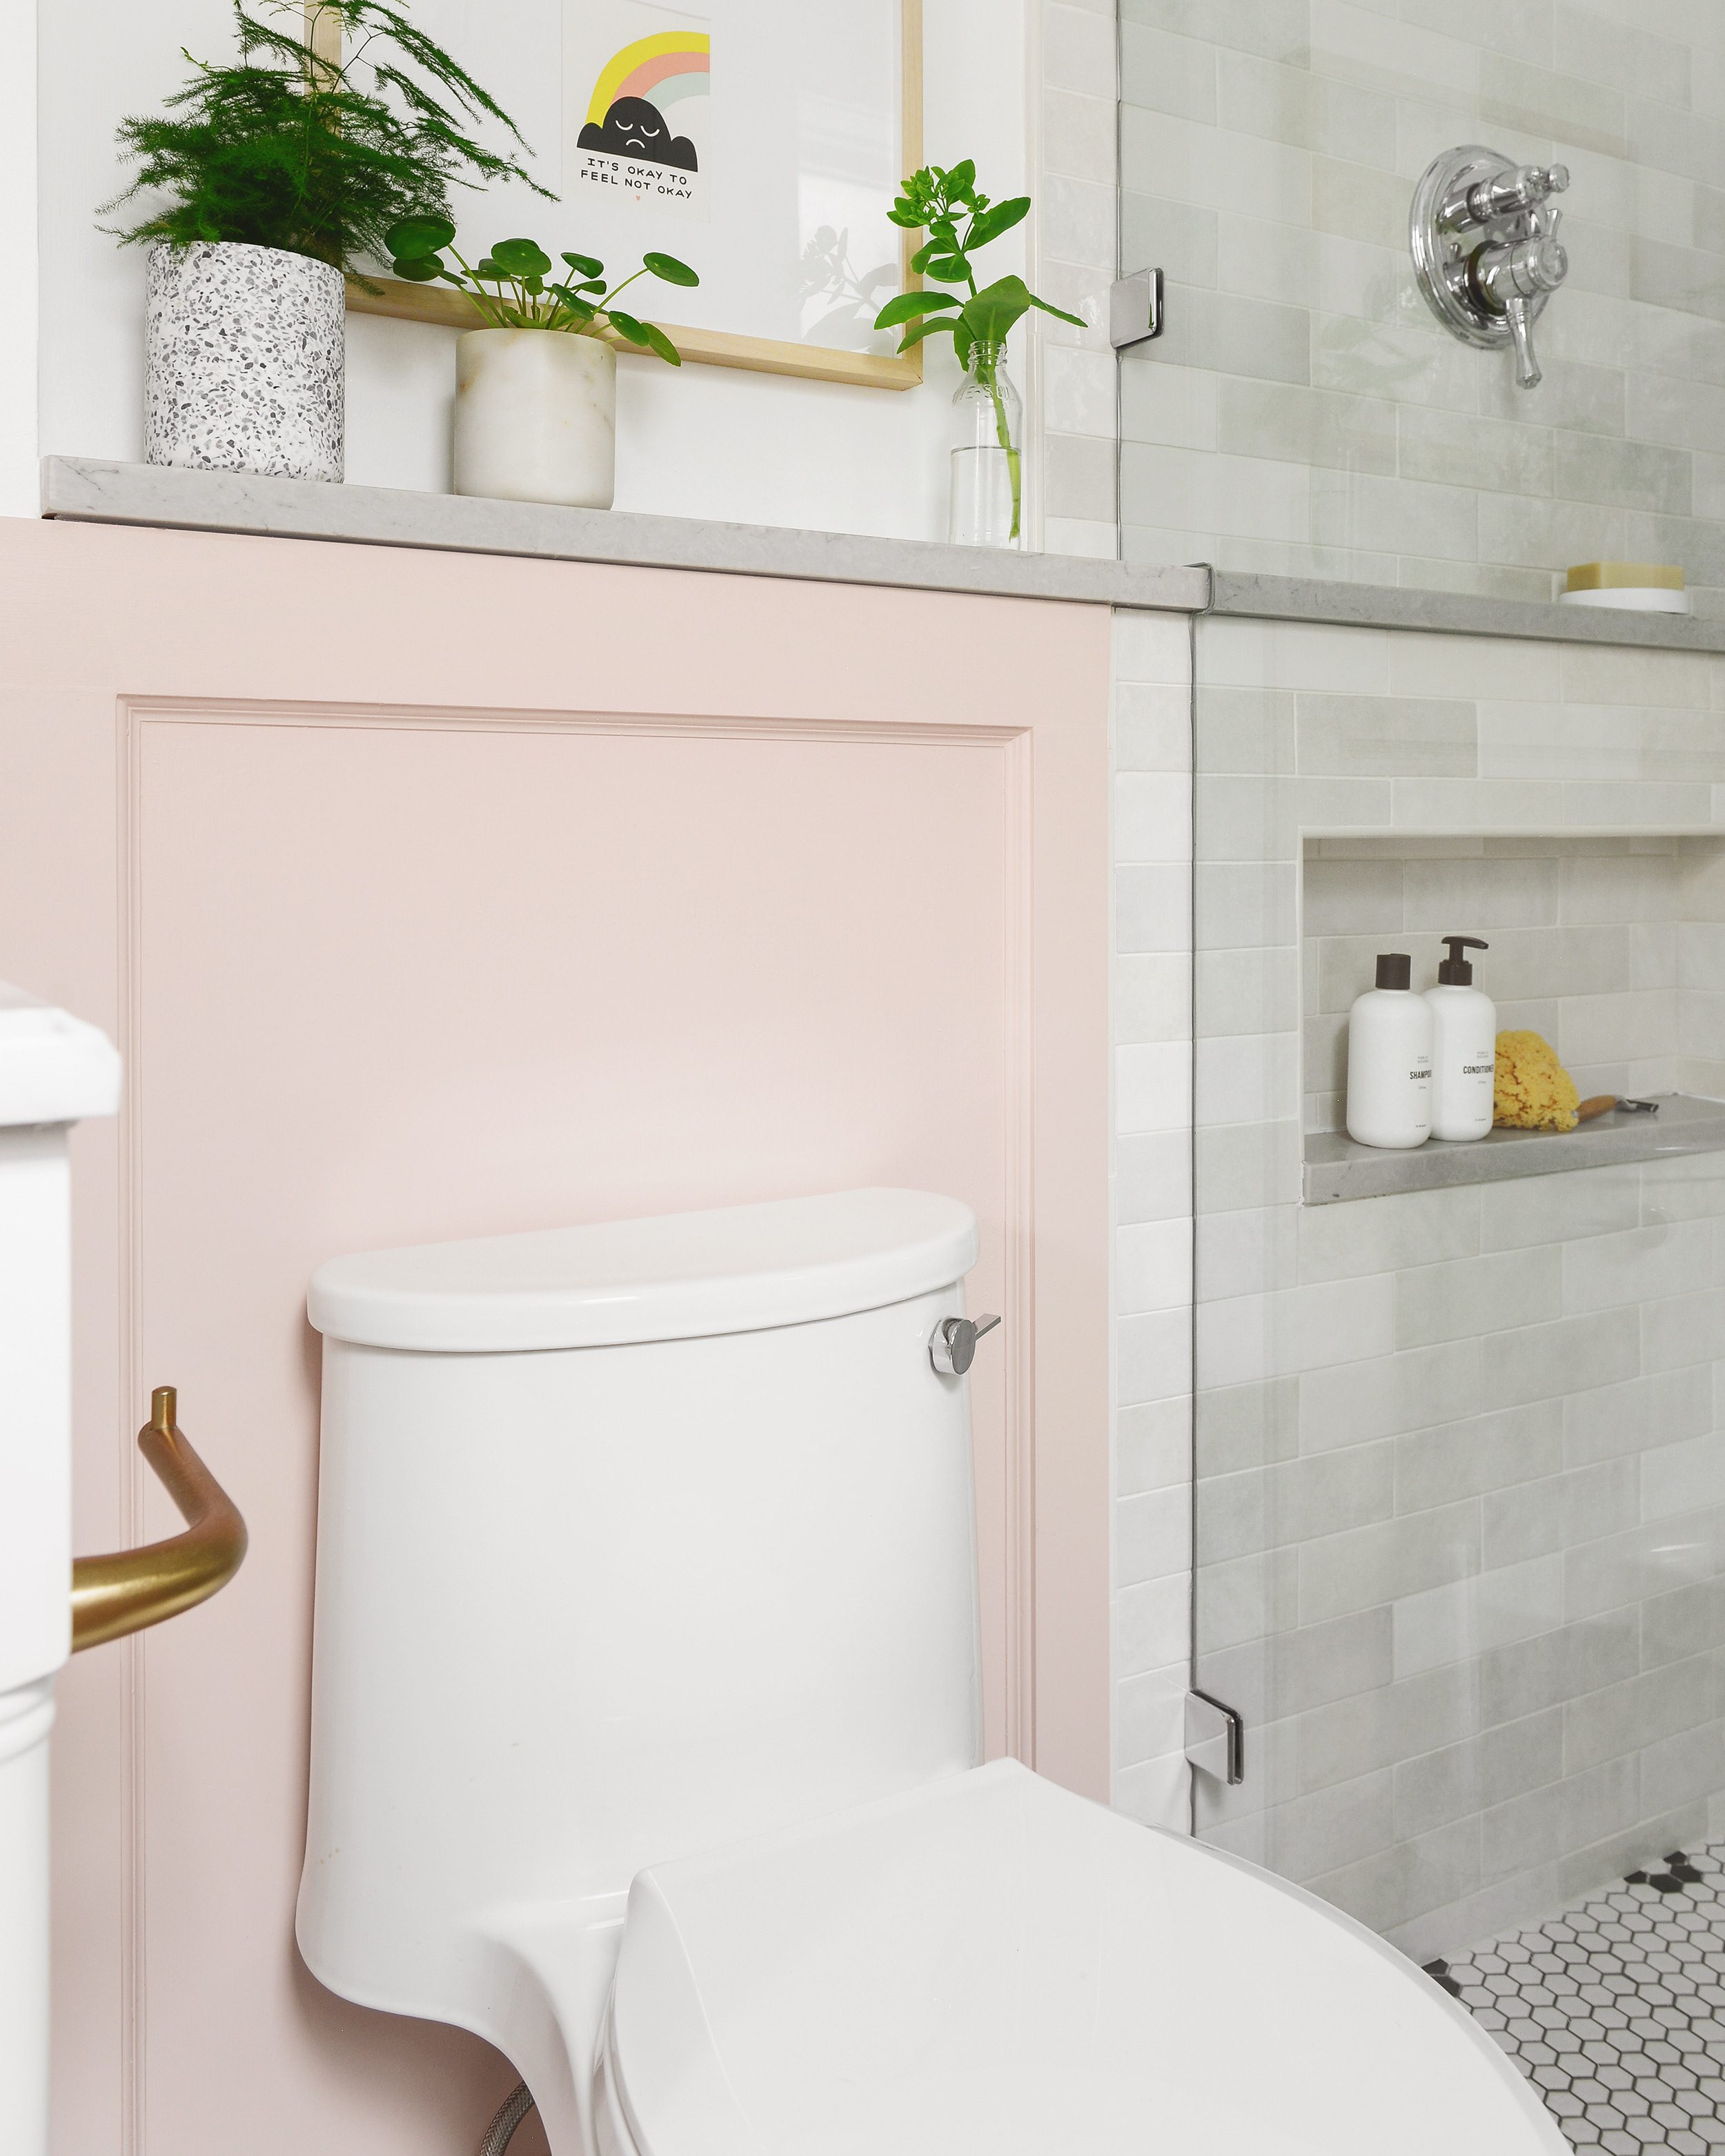 A small bathroom makeover with pink board and batten, rosette tile and marble | via Yellow Brick Home with Lowe's Home Improvement #lowespartner 